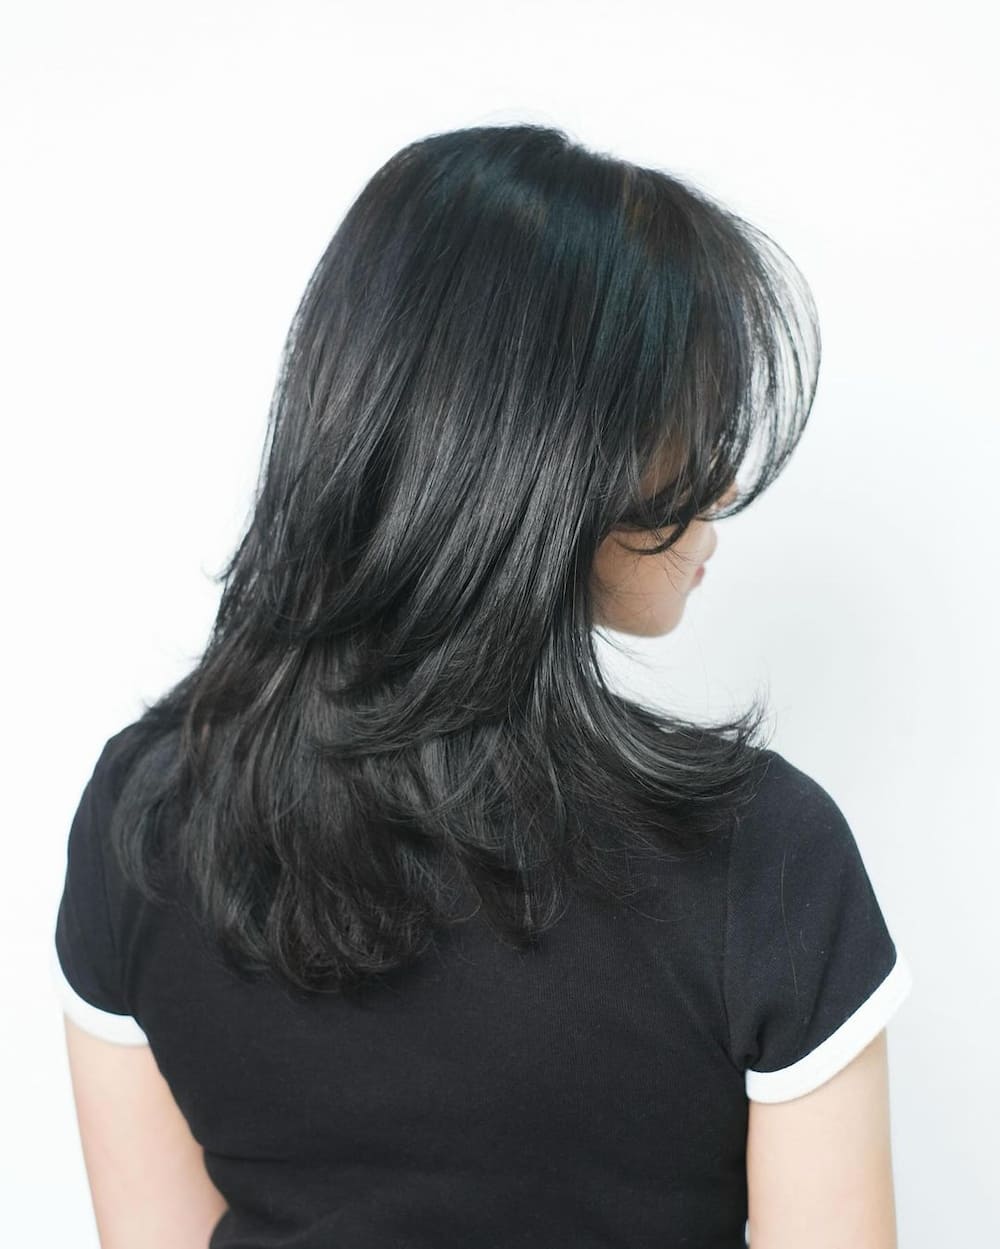 Hush cut with soft waves